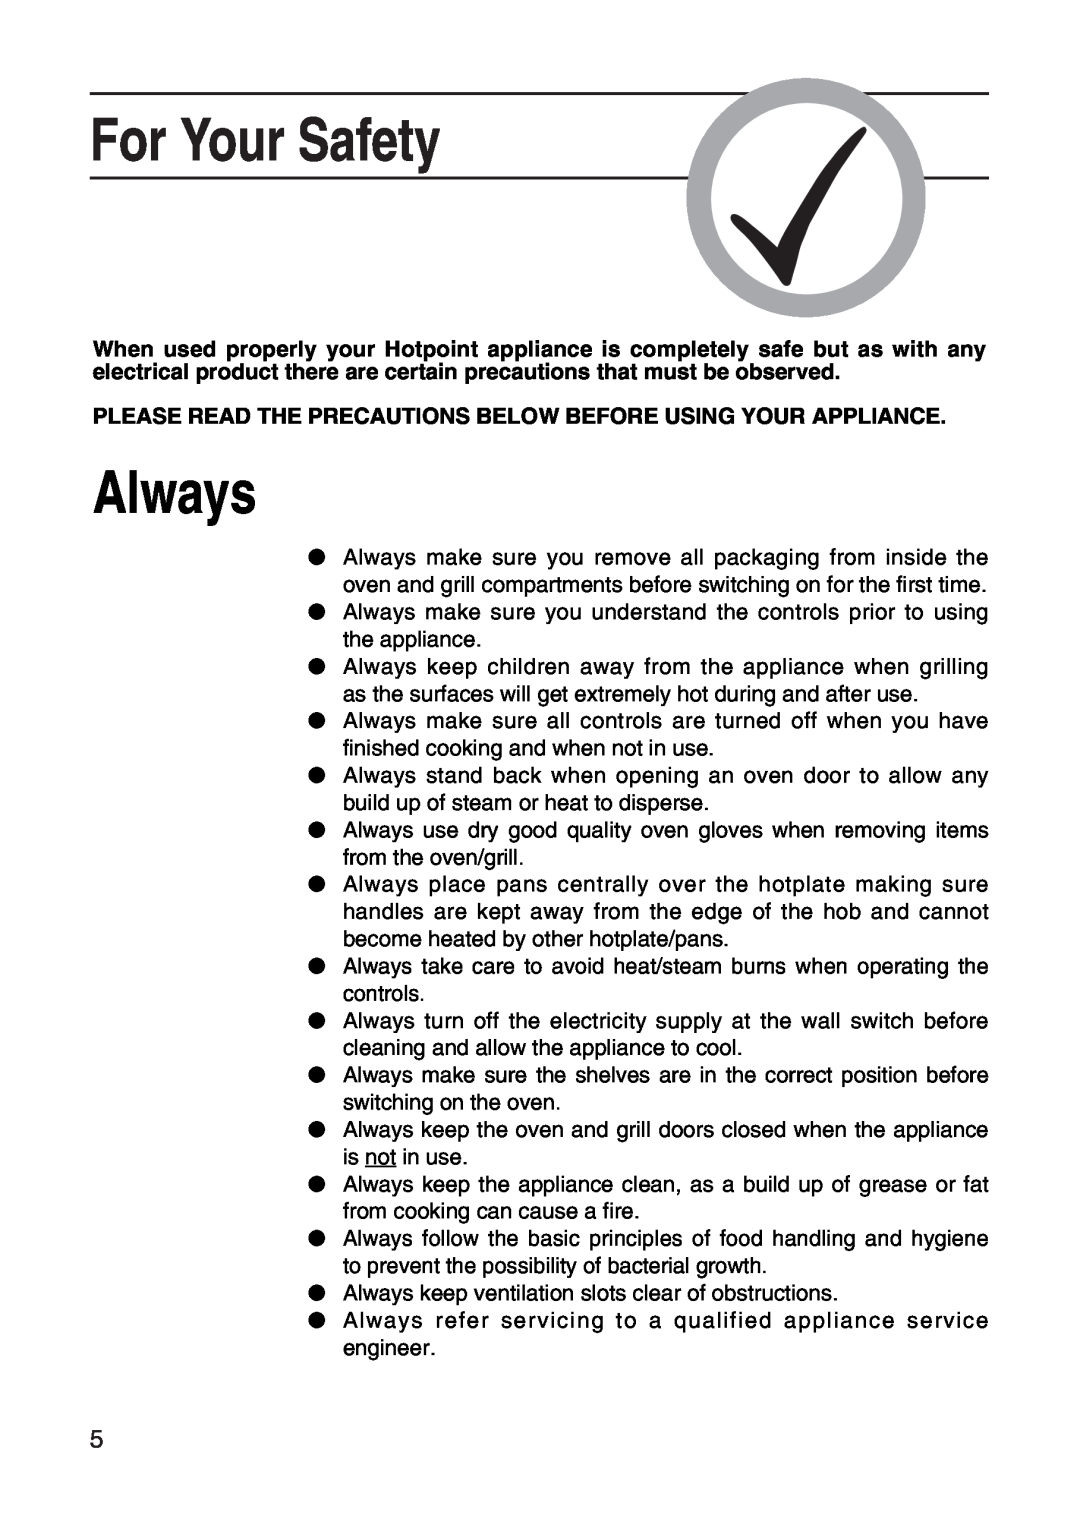 Hotpoint EH10 manual For Your Safety, Always 